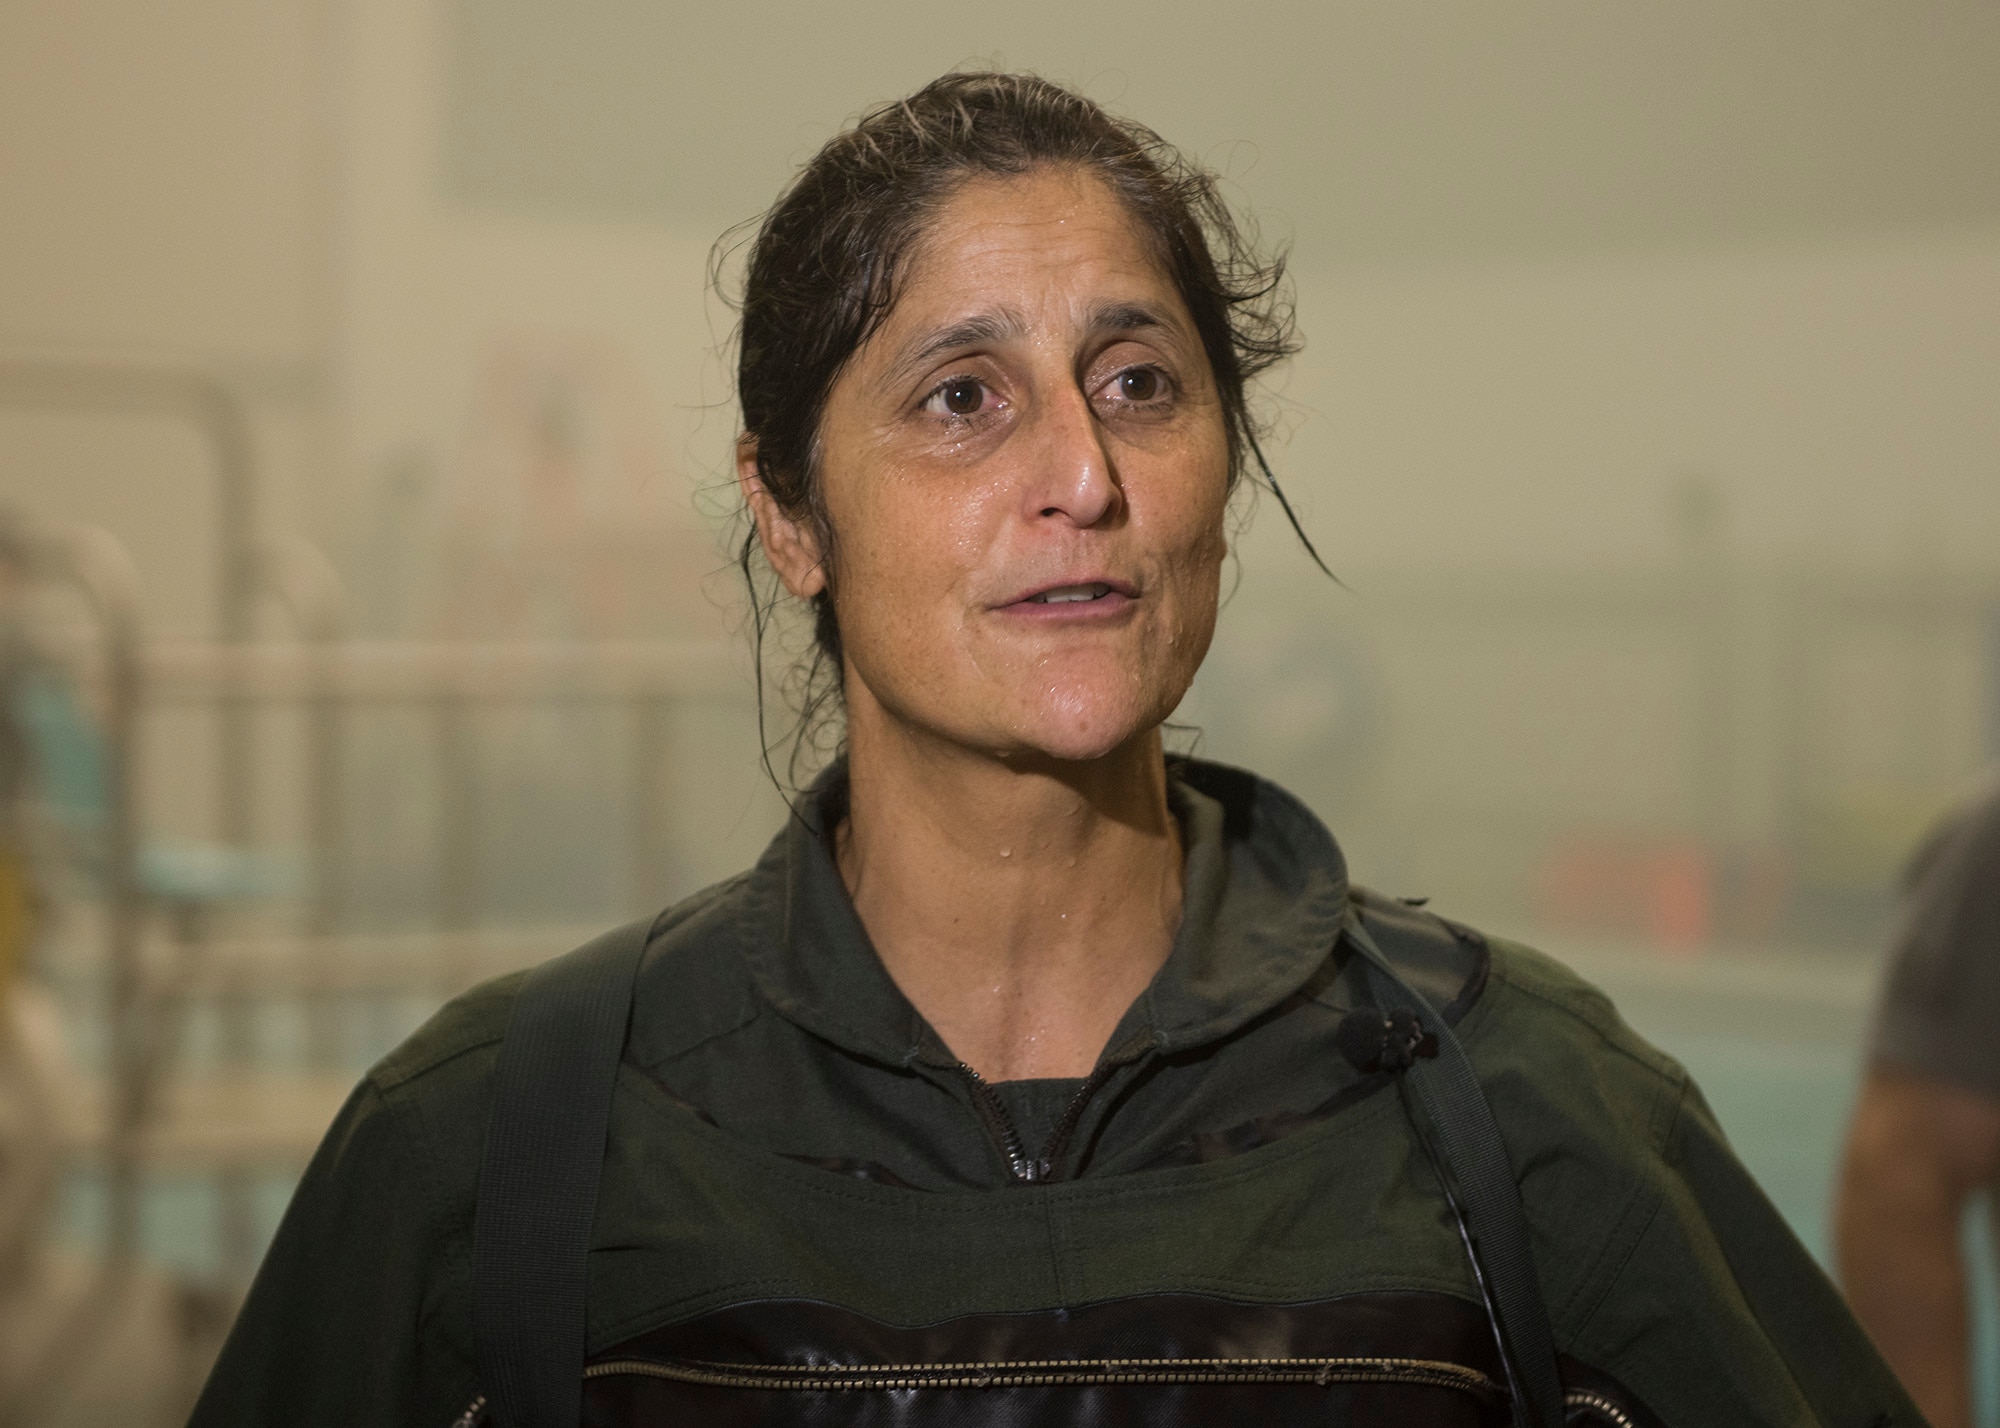 Sunita Williams, NASA astronaut, speaks to local media about her team’s training efforts Feb. 10, 2017, at Fairchild Air Force Base, Wash. NASA works with the Survival School for water survival and rescue training as it does not have its own dedicated facility. (U.S. Air Force photo/ Airman 1st Class Ryan Lackey)